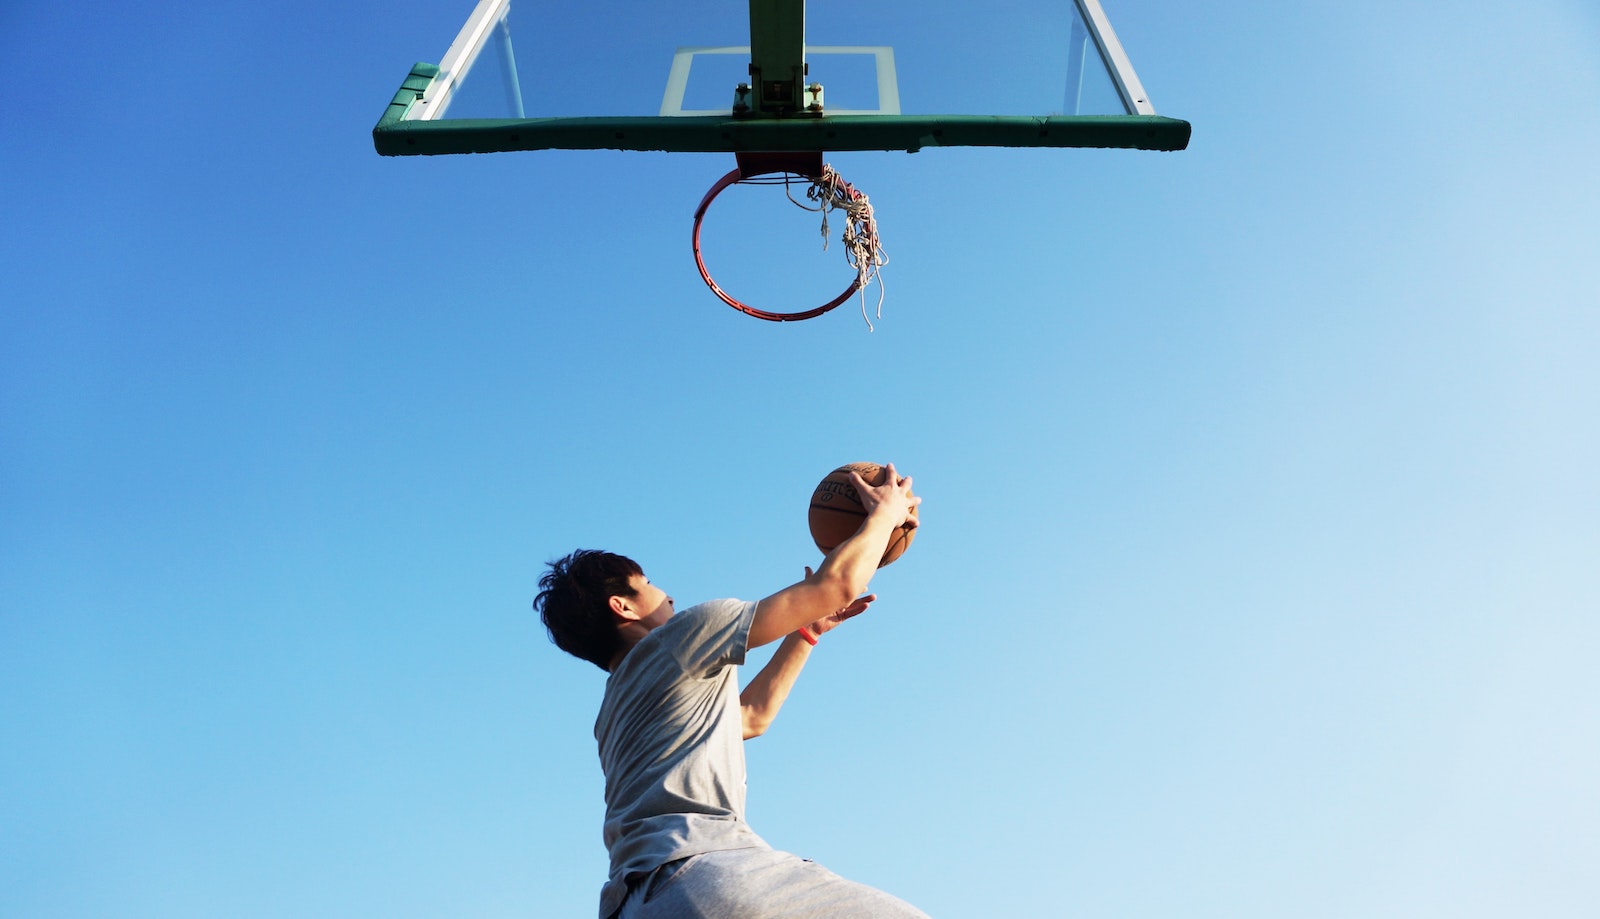 Low angle shot of a person with a basketball going for a layup on a basketball hoop against a light blue sky